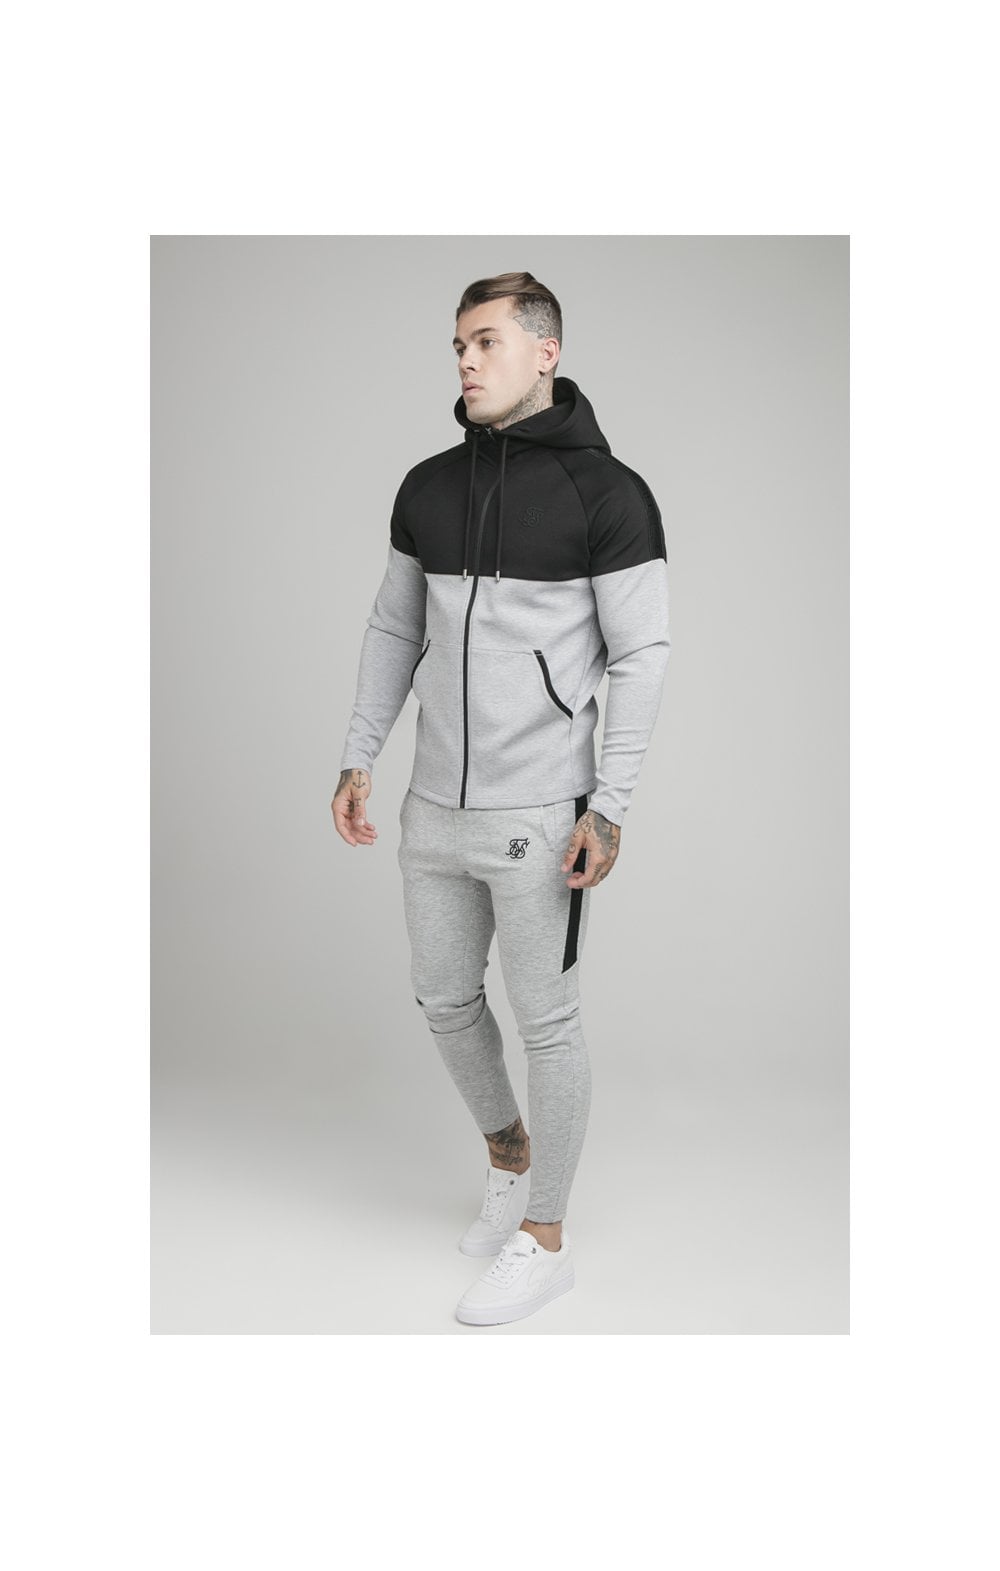 Load image into Gallery viewer, Black Motion Tape Zip Through Hoodie And Jogger Set (7)